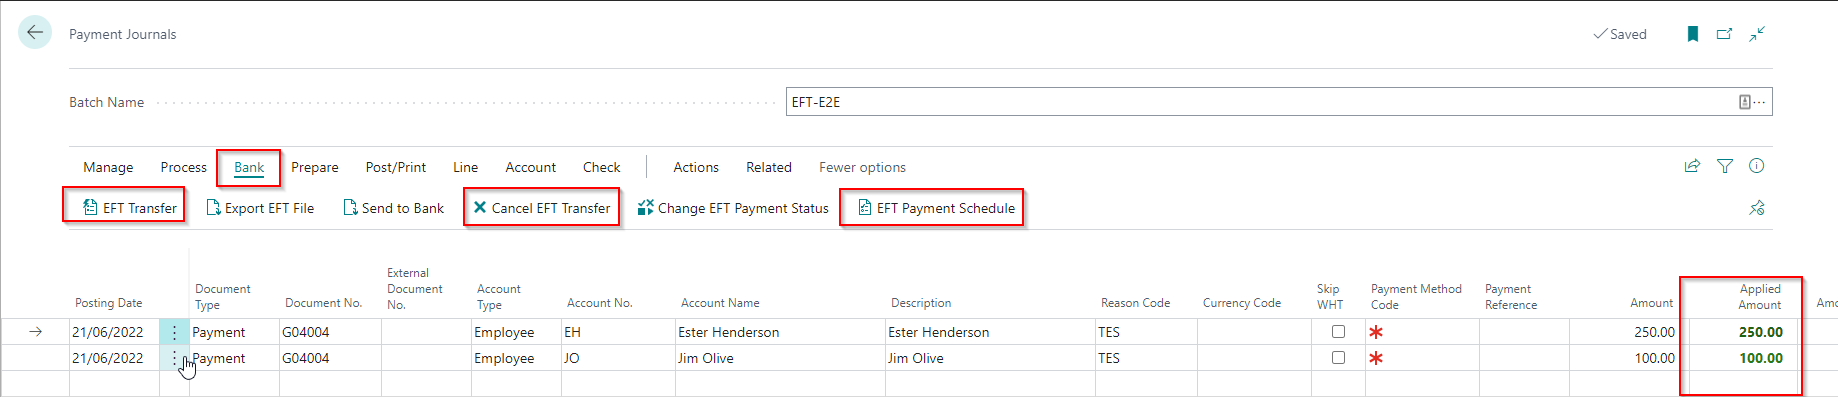 Reviewing EFT Transfers - Payment Journal